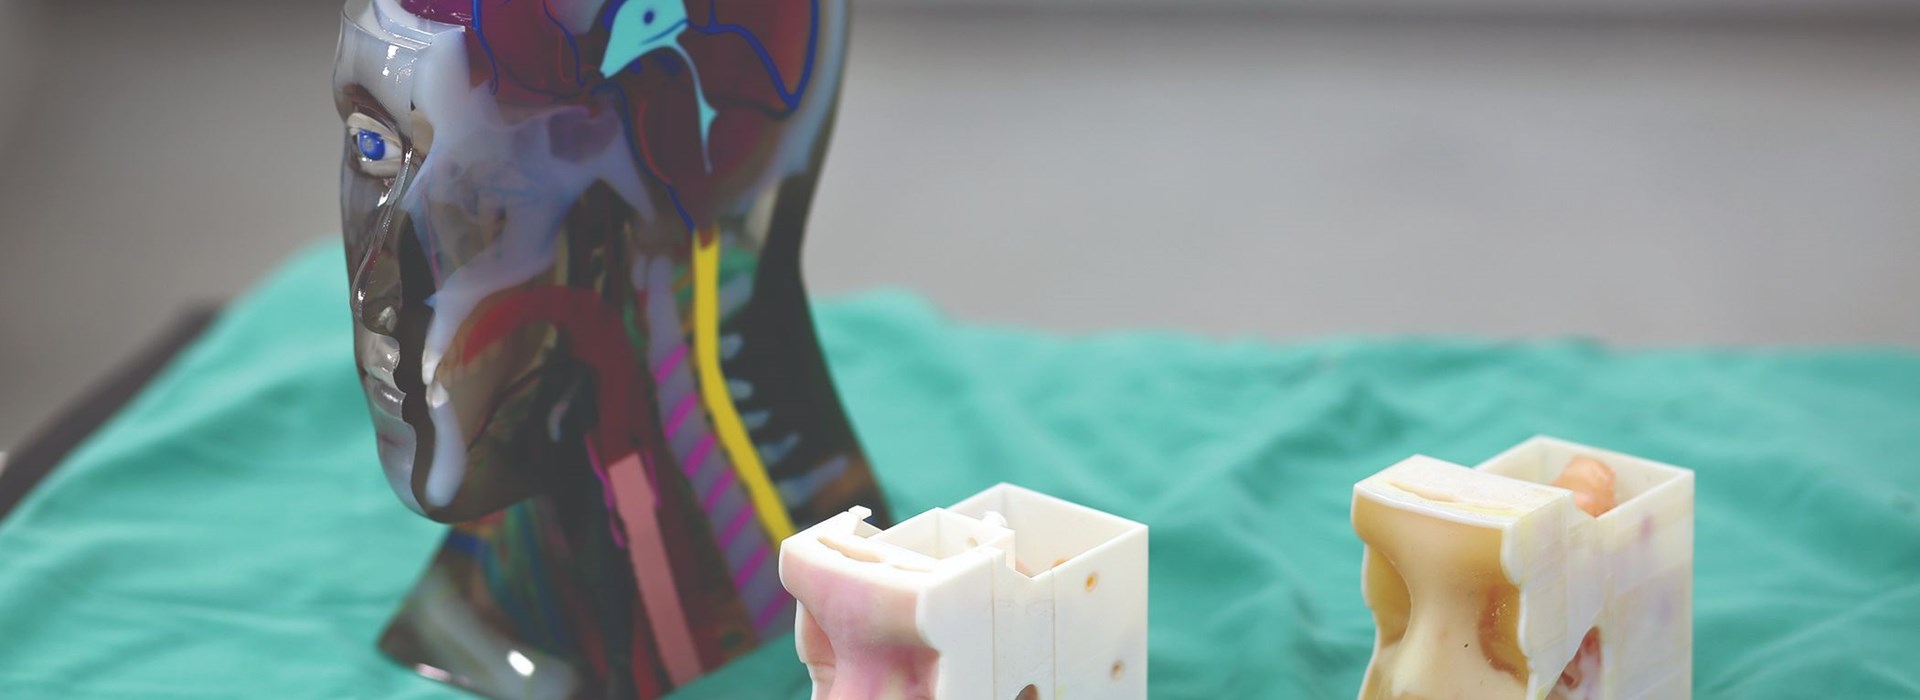 3D printed patient-specific models for surgical planning.